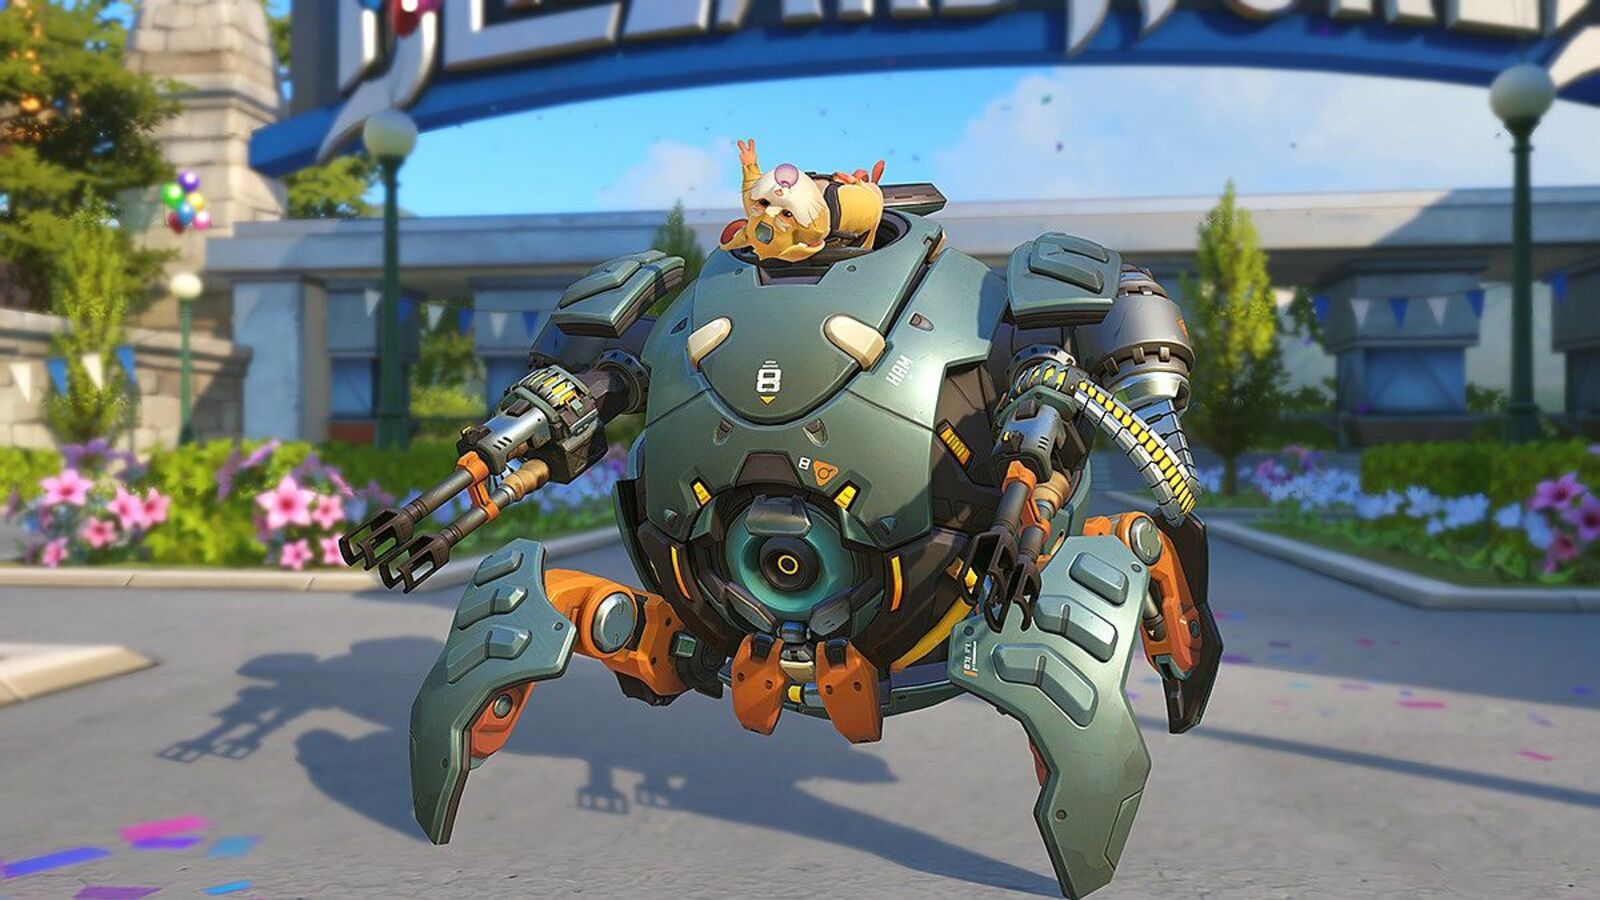 Overwatch Wrecking Ball and counters according to the lead designer